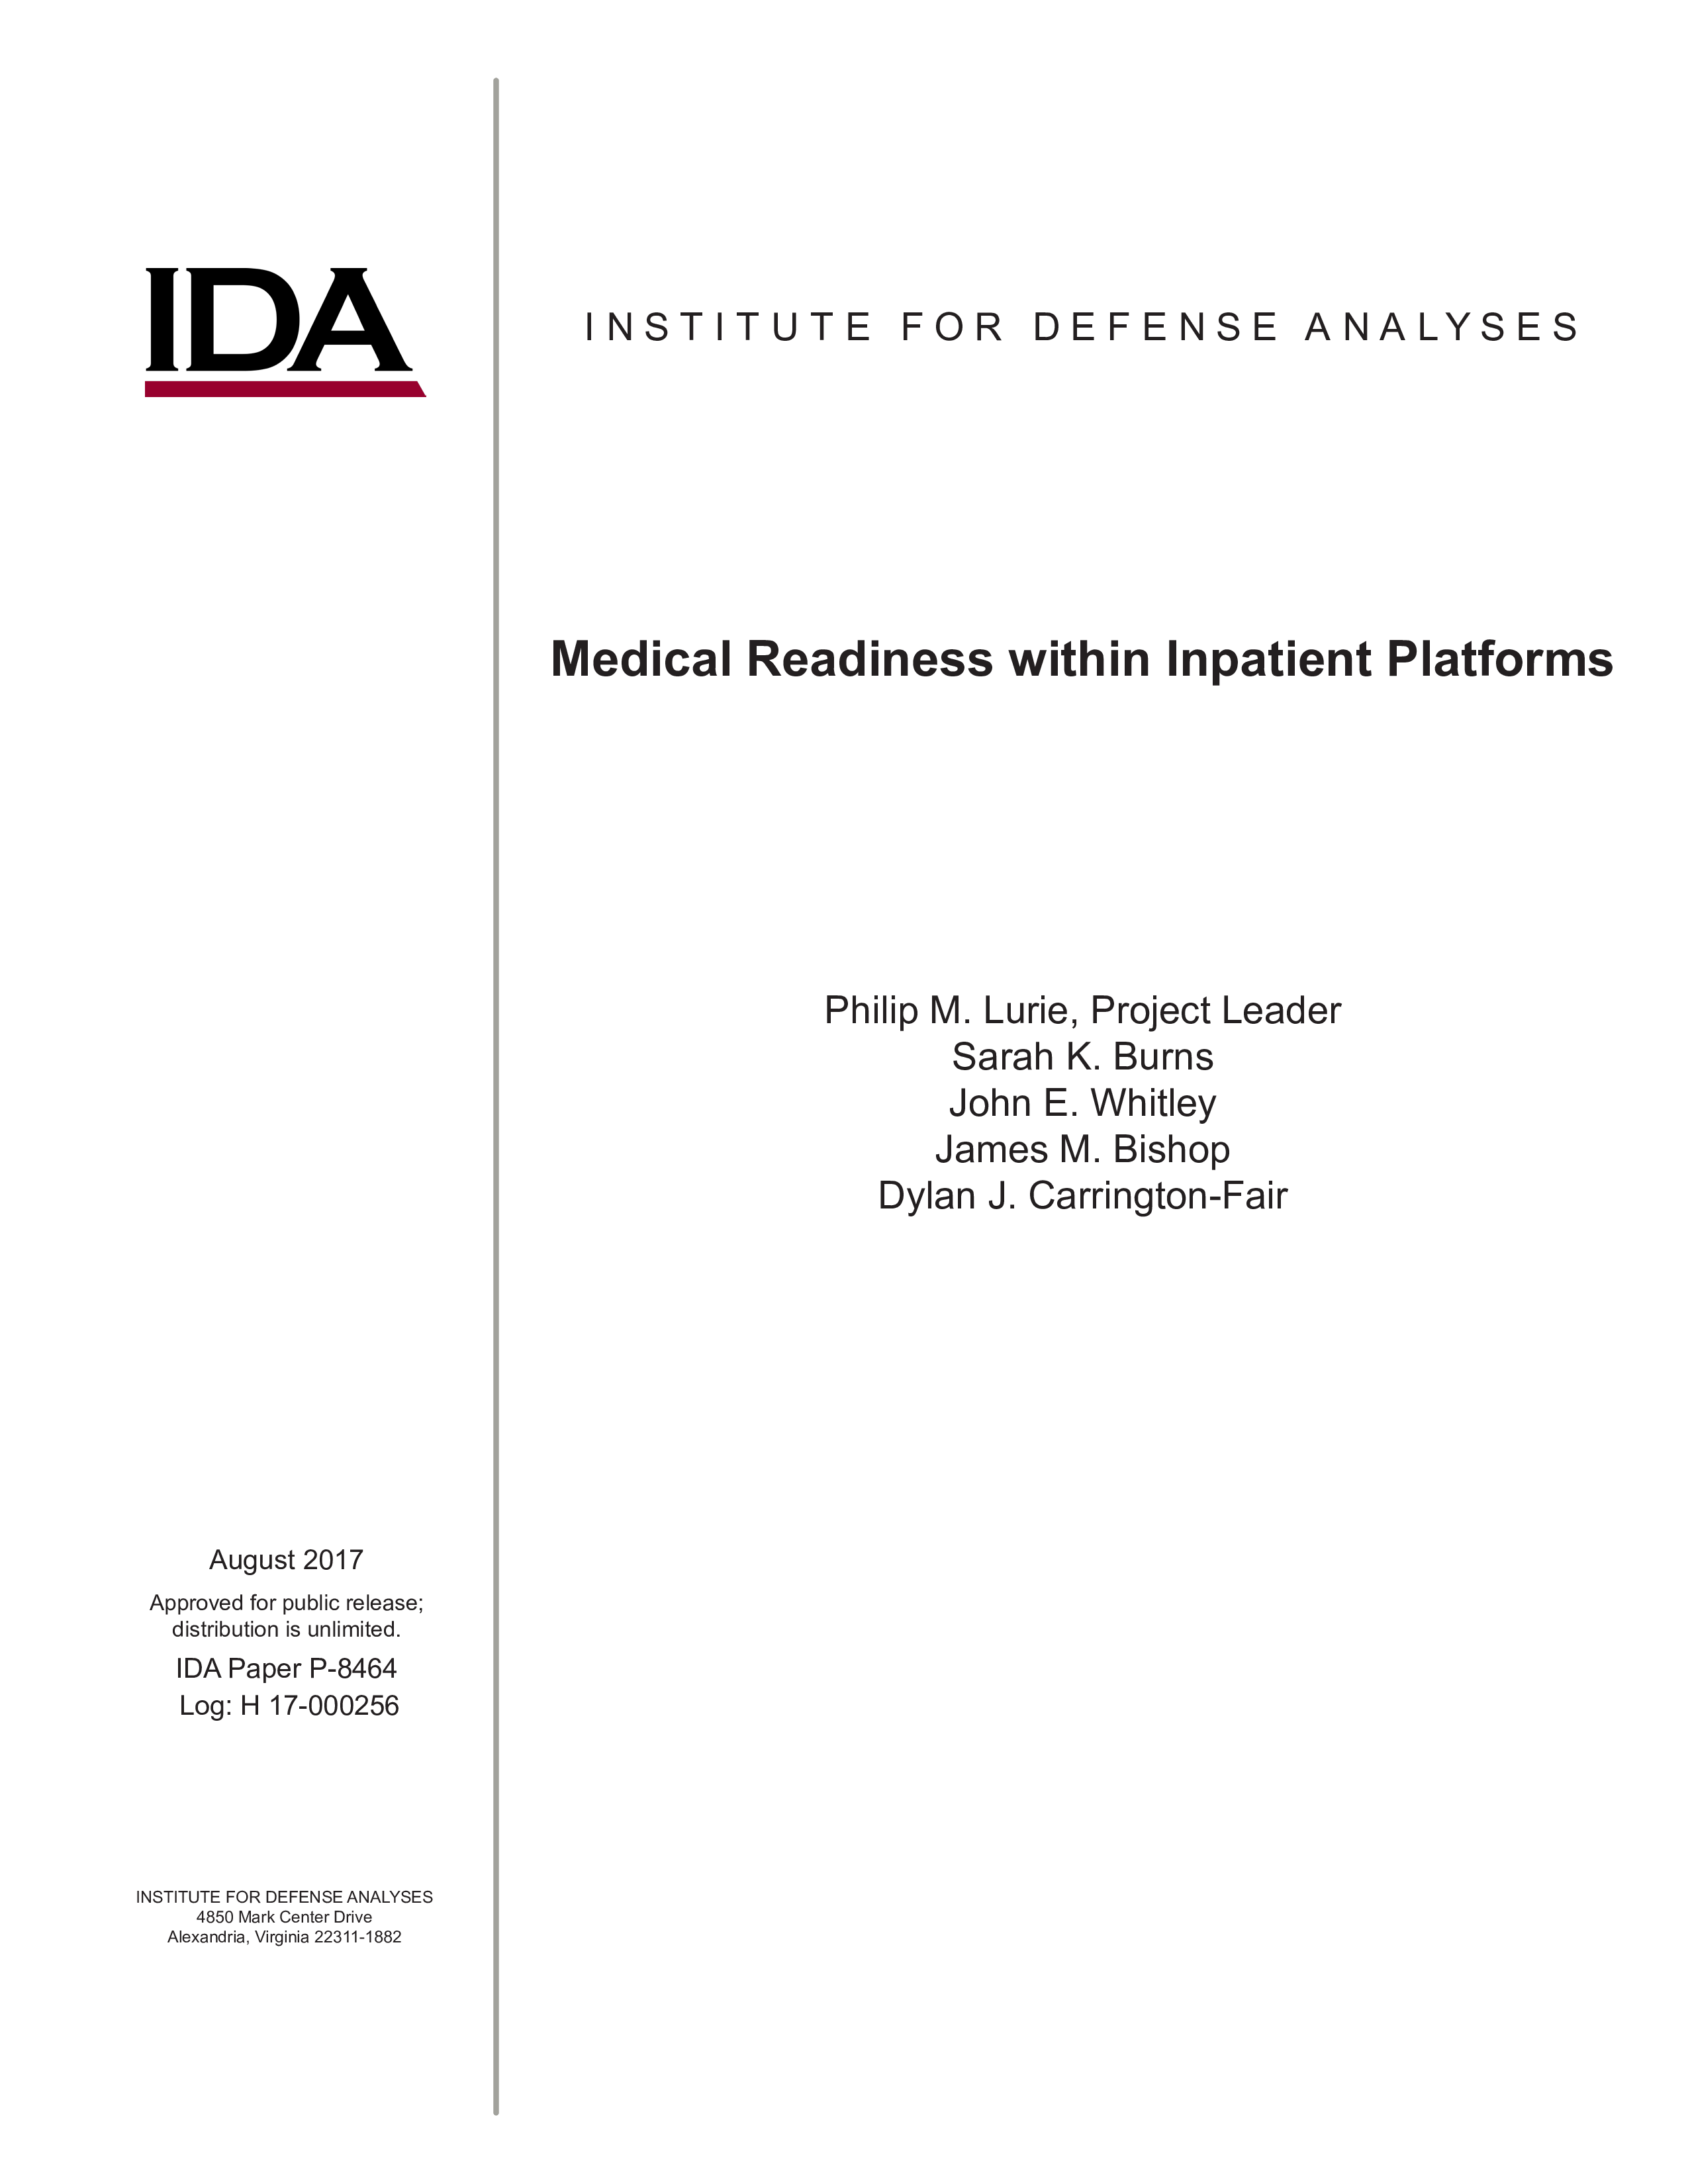 Medical Readiness within Inpatient Platforms